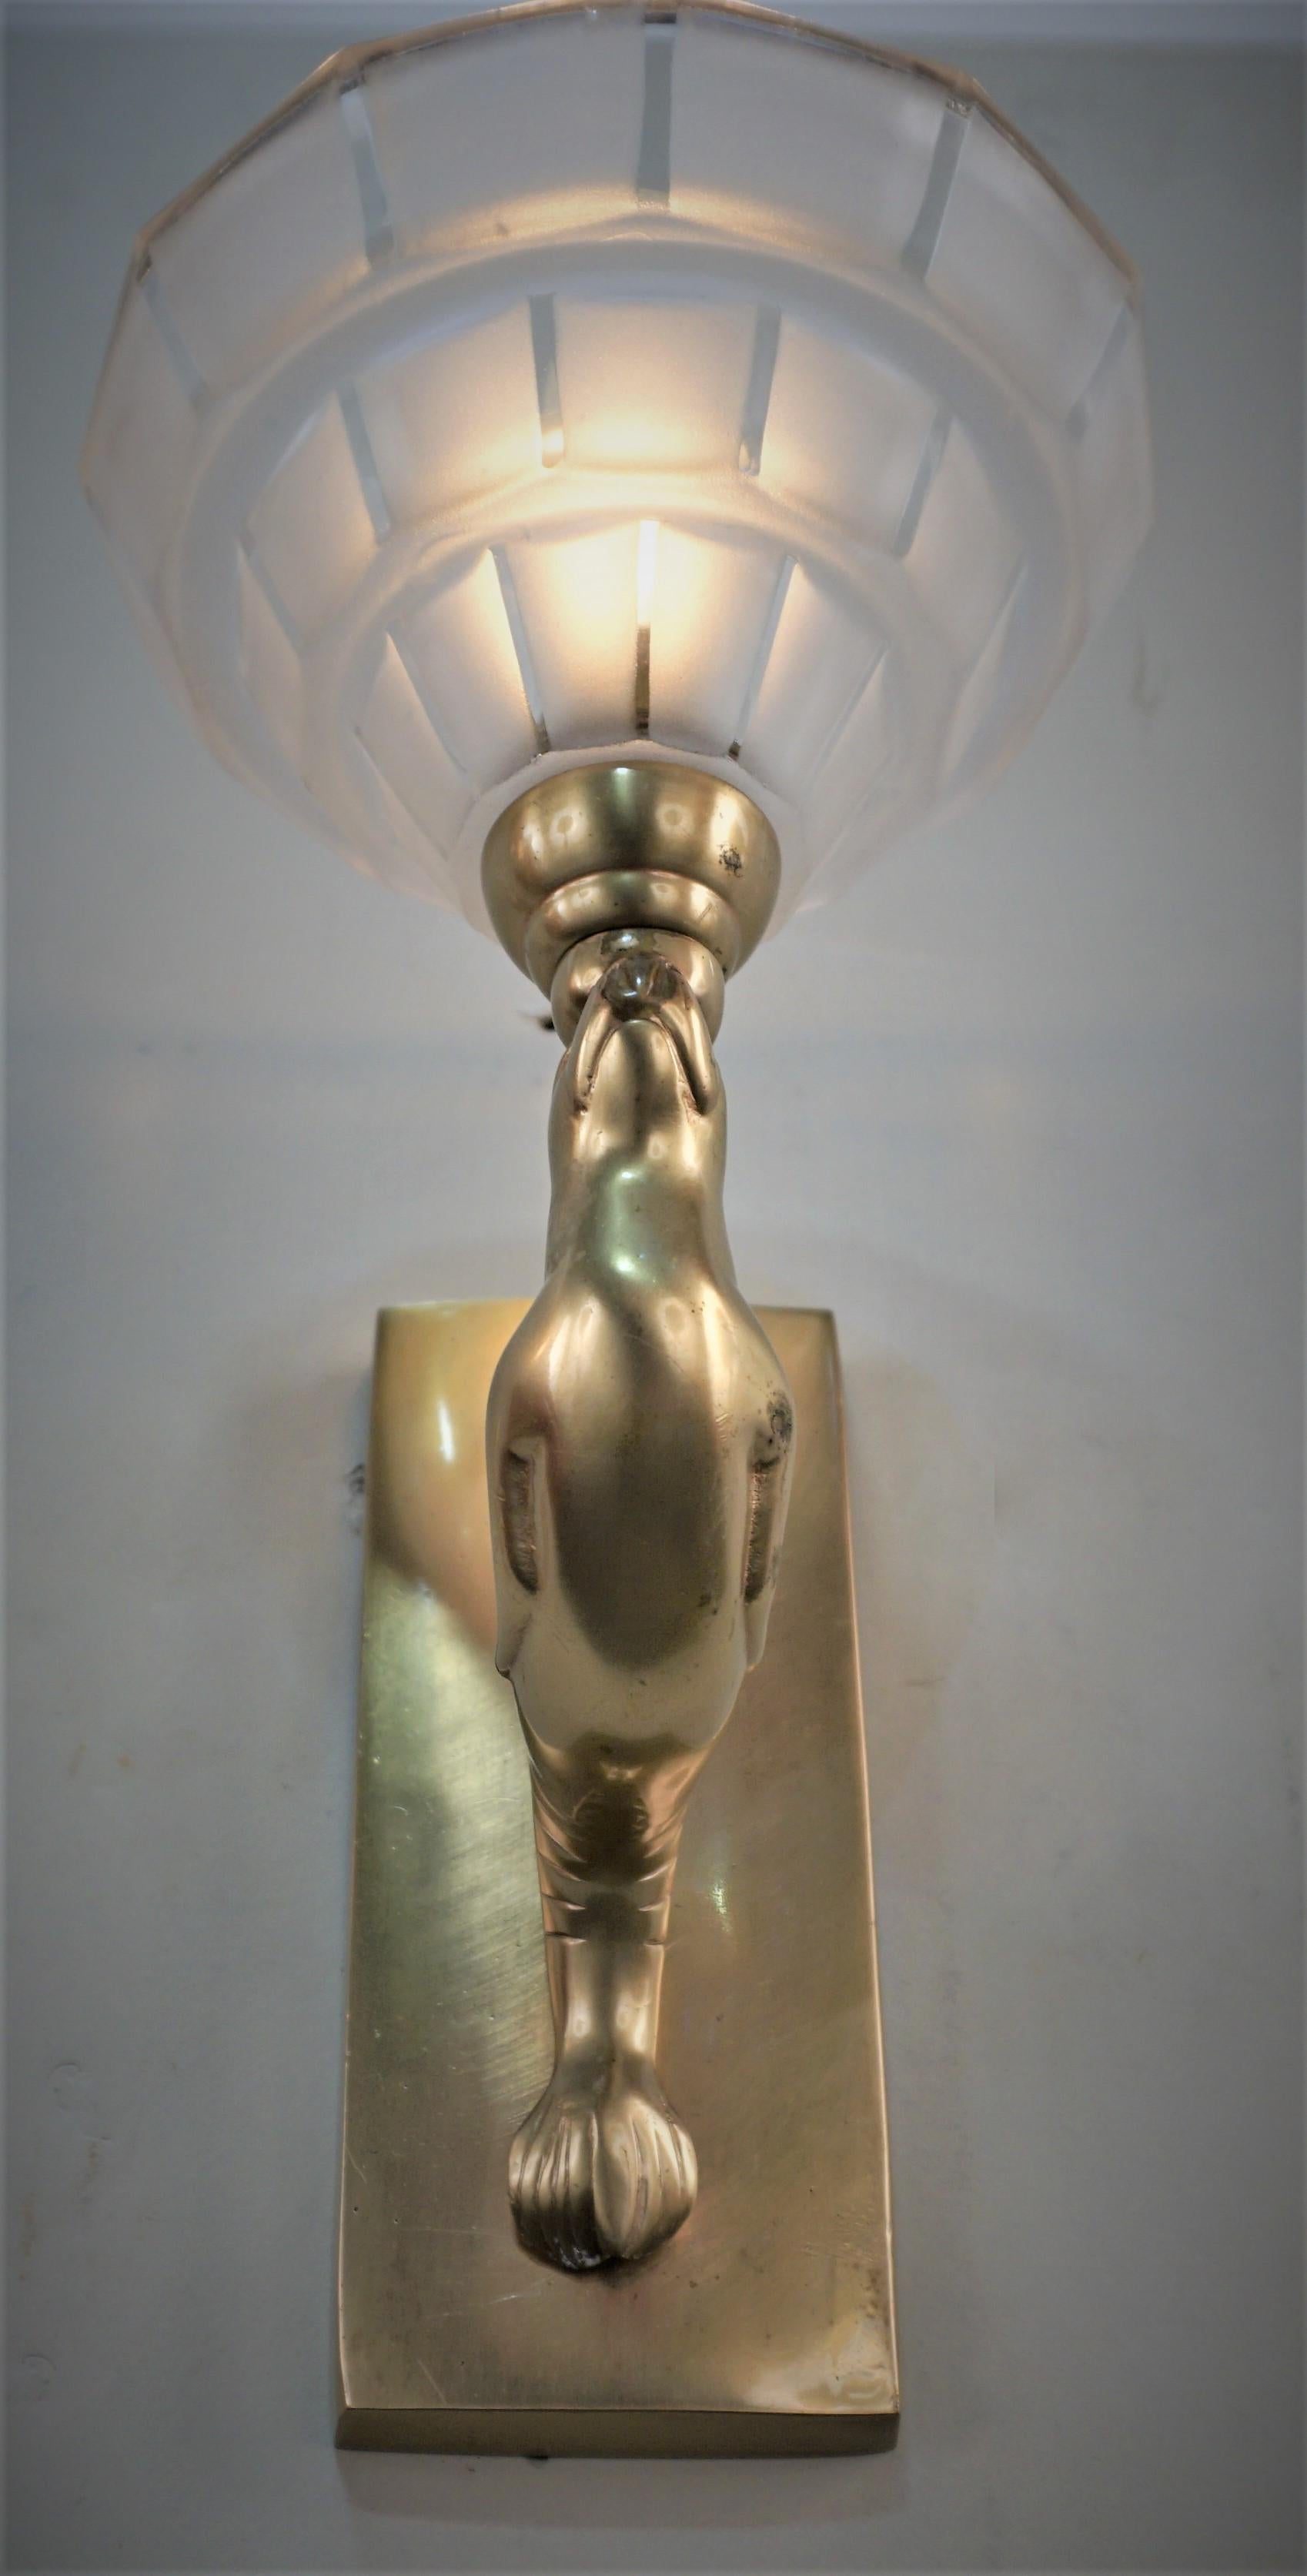 French Art Deco Seal Wall Sconces - 2 pairs For Sale 2